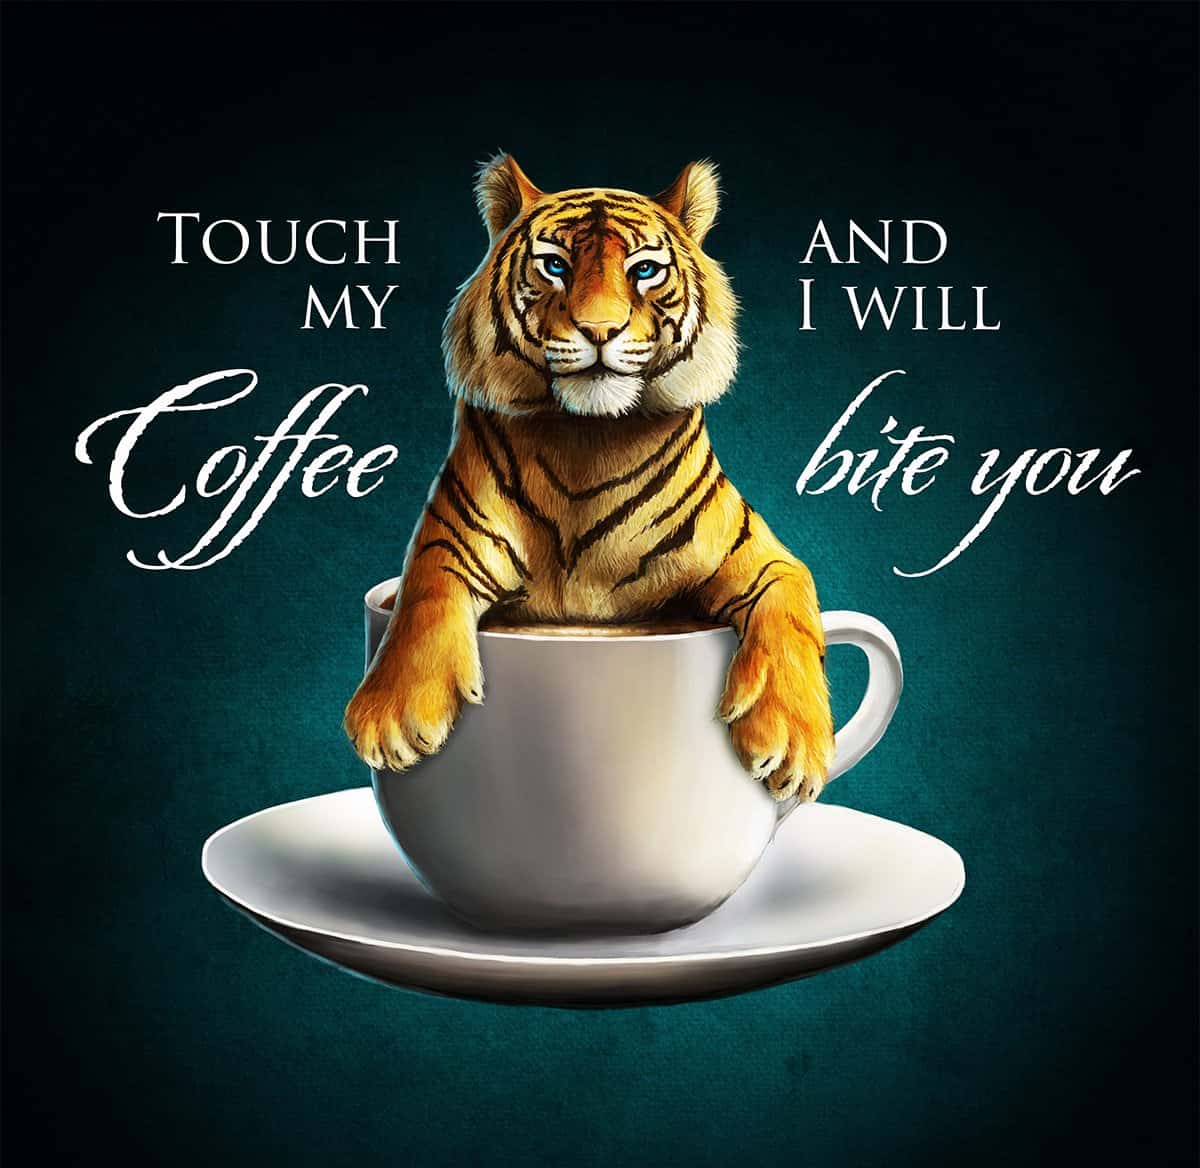 T-Shirt Design Touch my Coffee and I will bite you, T-Shirt Designer Andrea Baitz, Illustration, Digital Painting, Digital Illustration, Graphic Design, Ines Kampf Design, T-Shirt Designer Germany